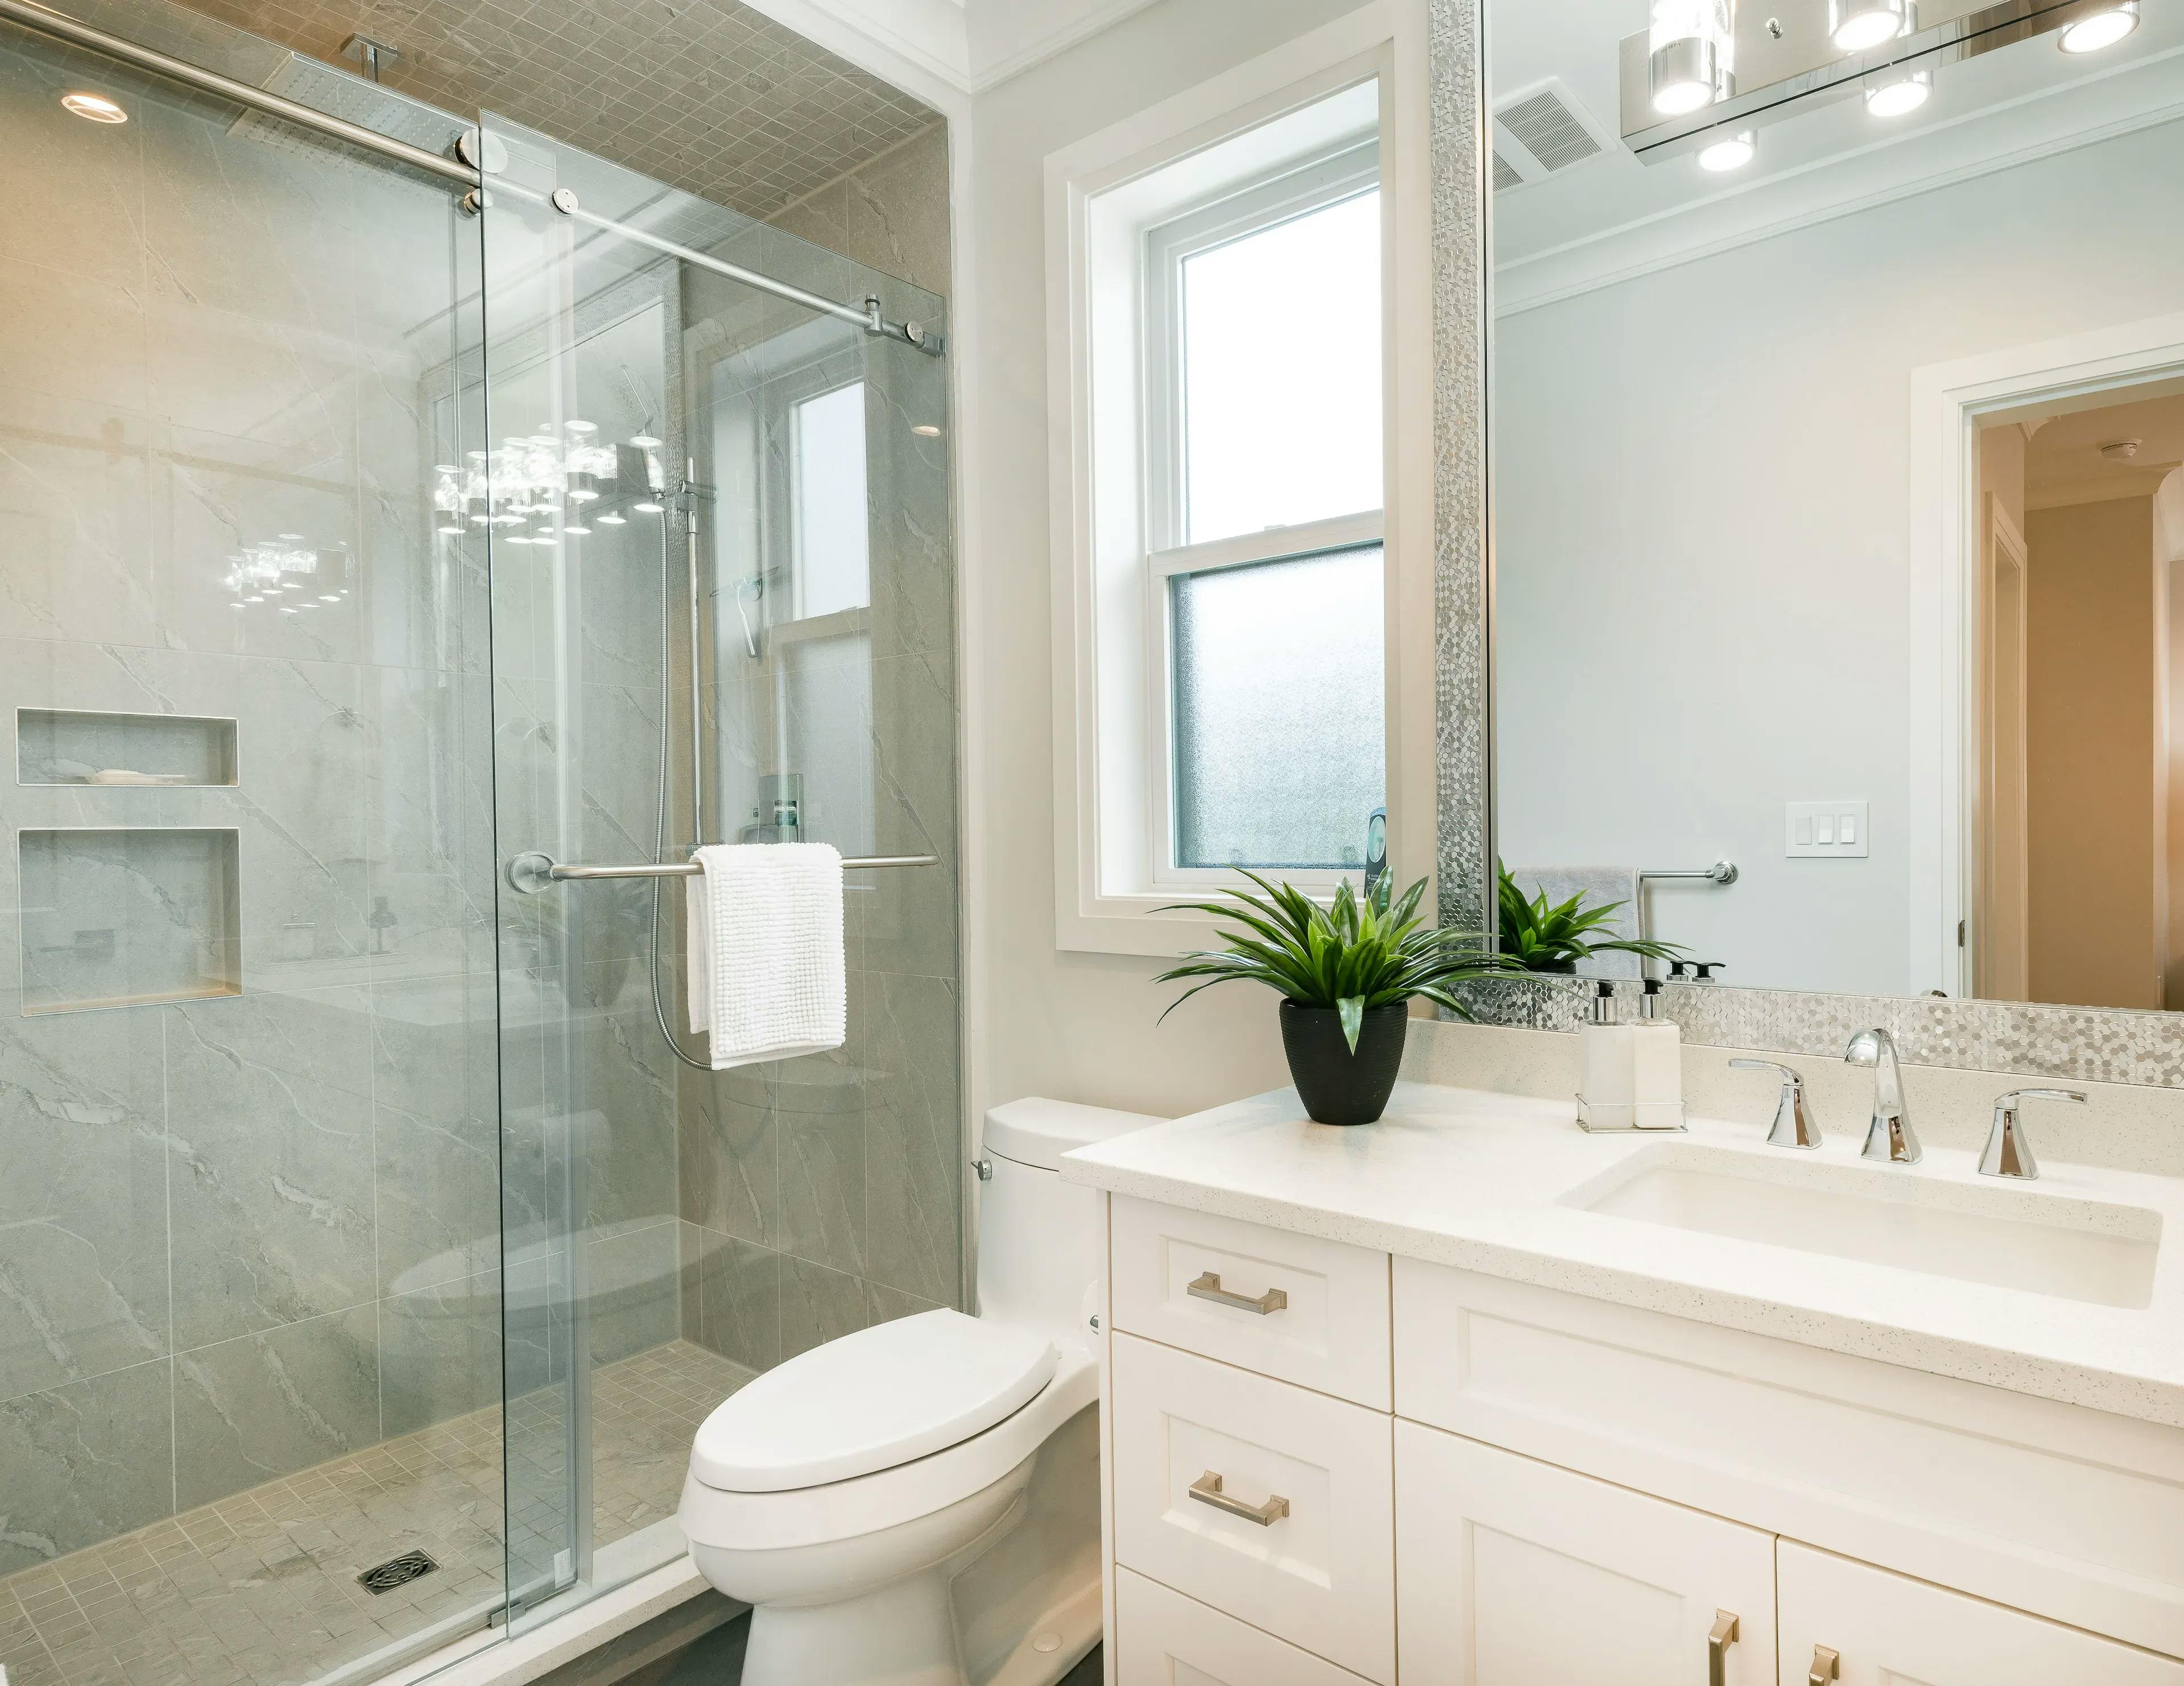 Bathroom setting featuring a vanity with a mirror, a toilet seat, and sliding glass doors